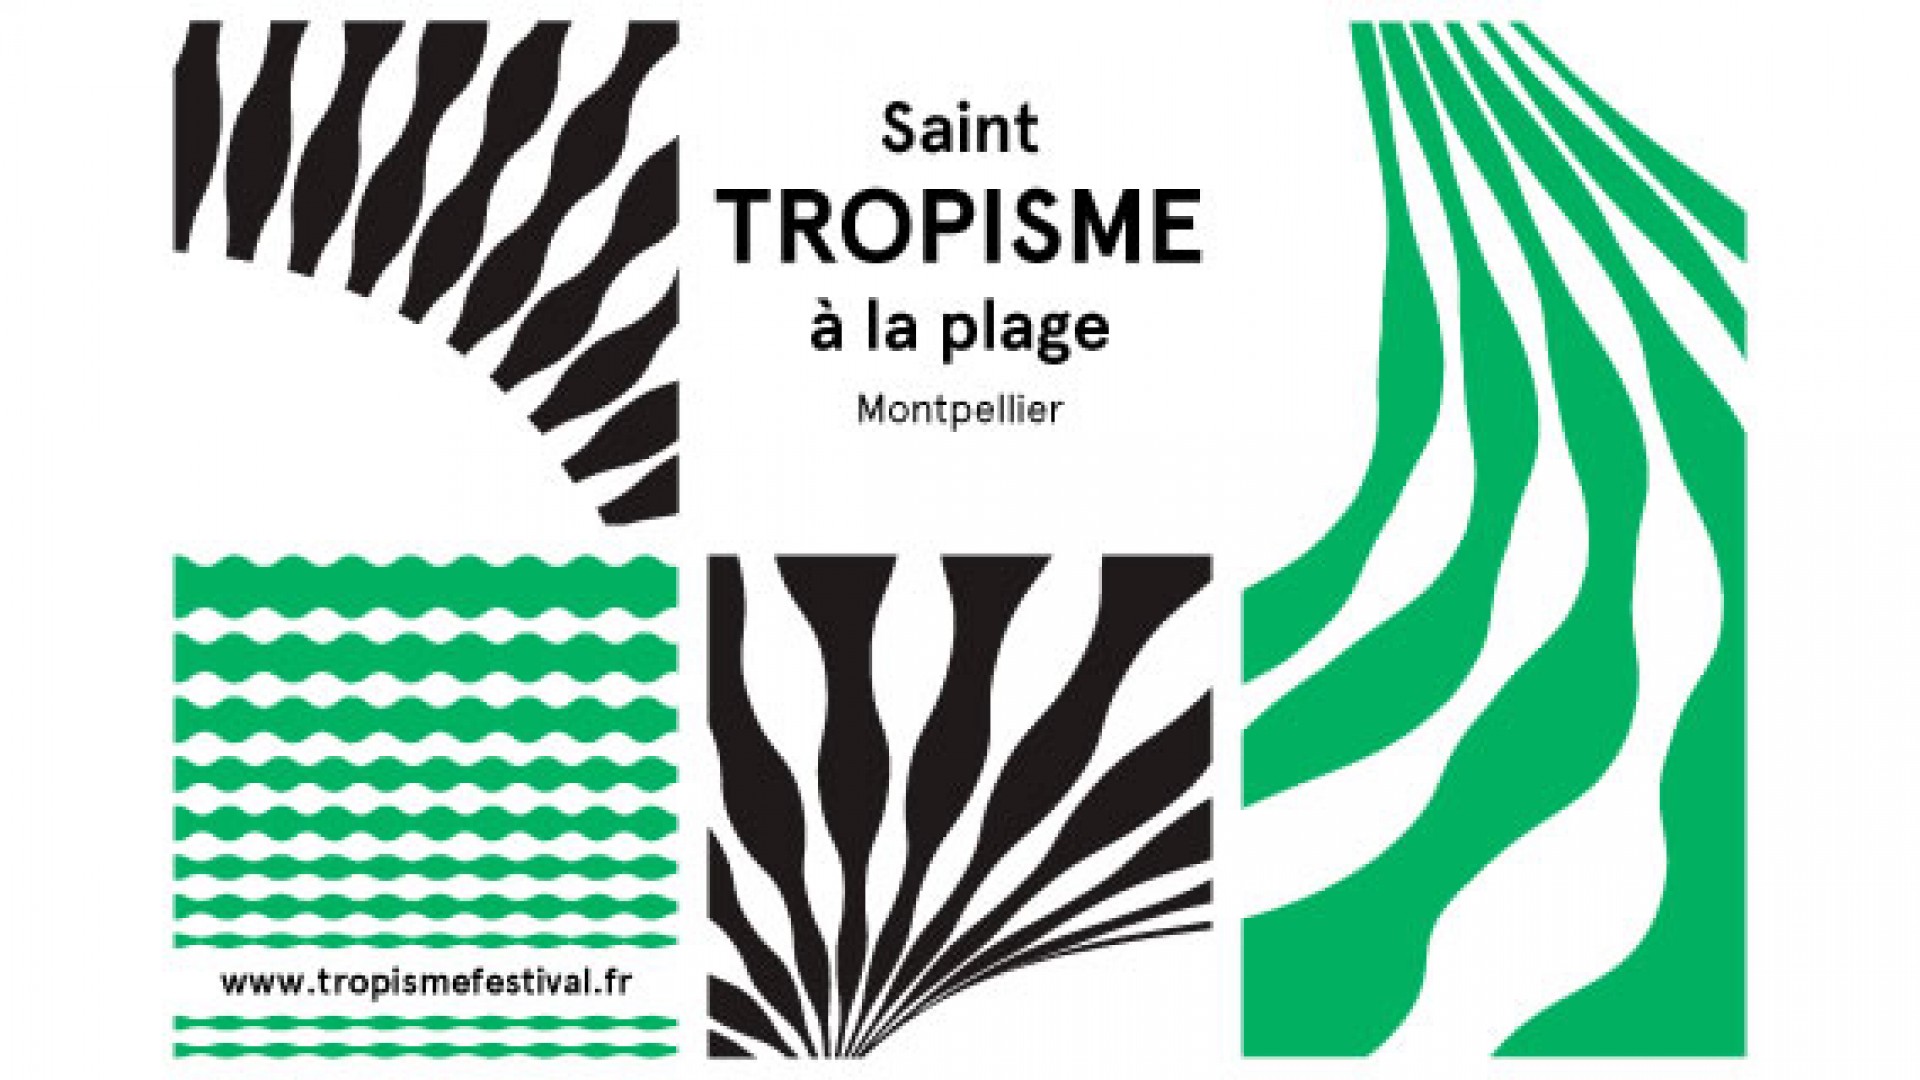 The 18h18 at the "Festival Tropisme" in Montpellier